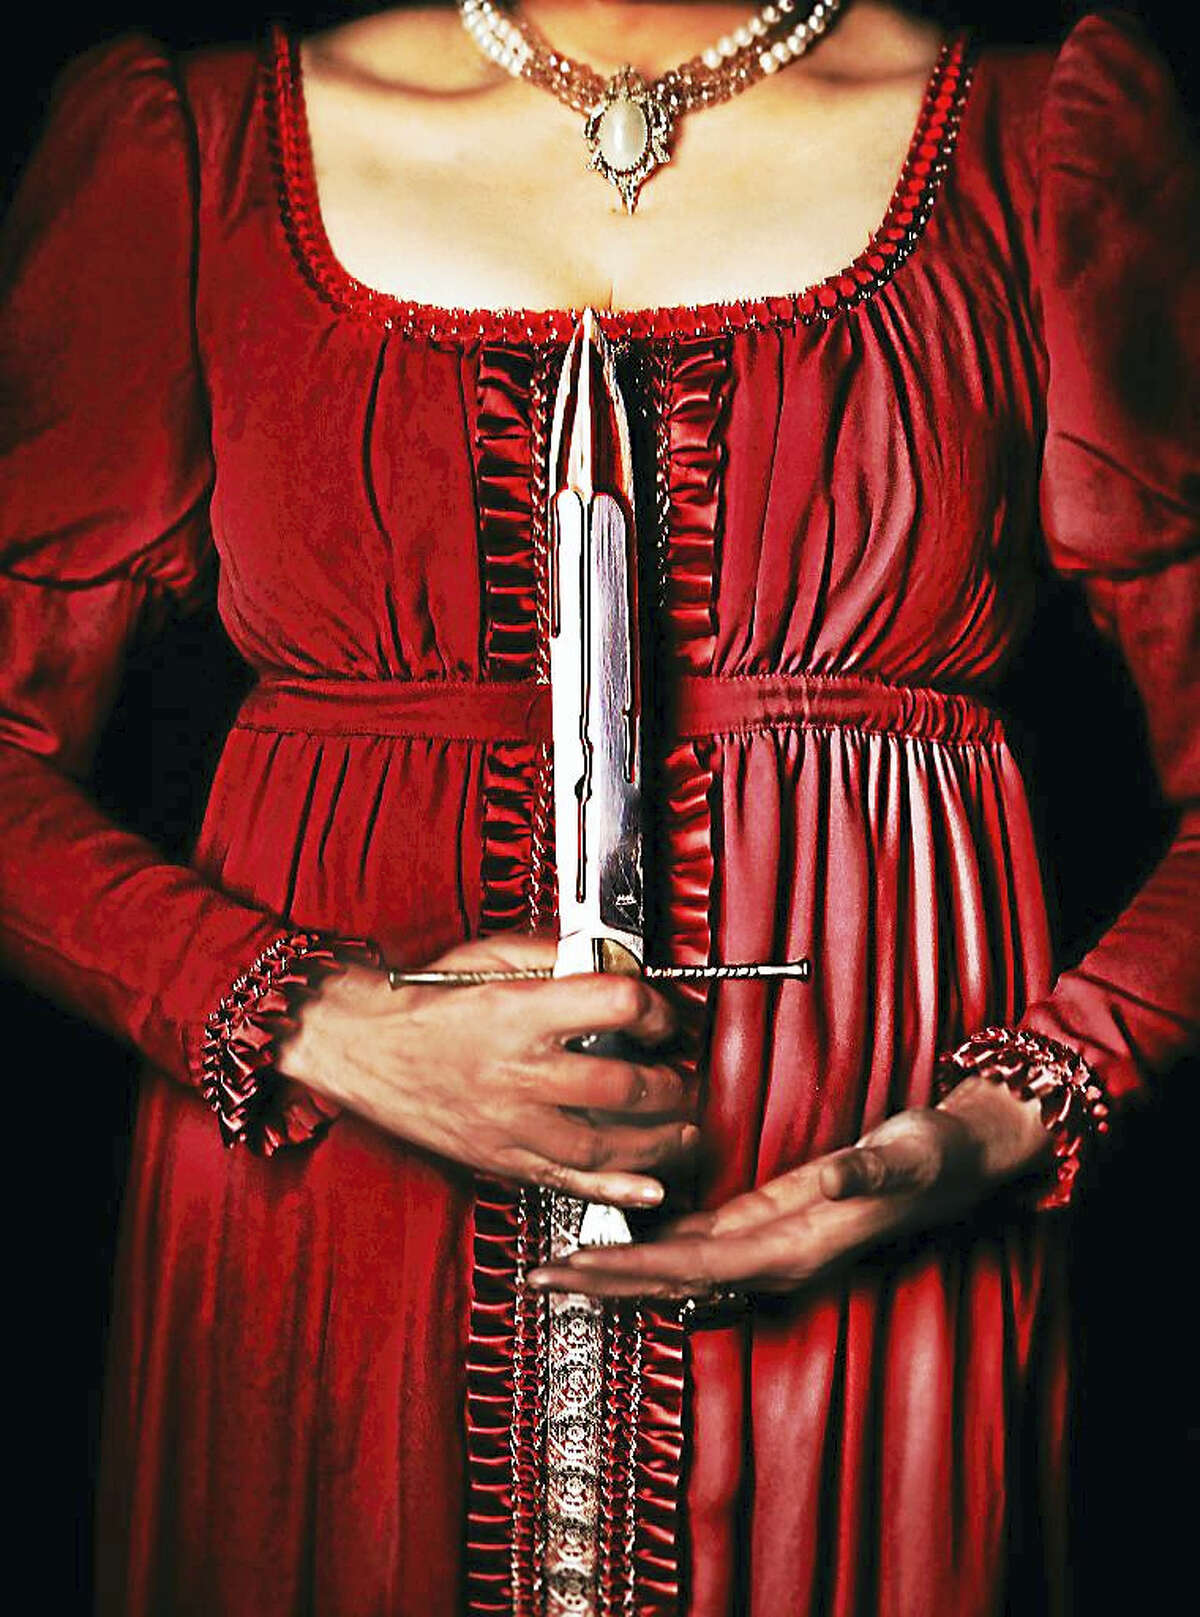 Contributed photo A publicity still photo for Puccini’s opera, Tosca, which will be broadcast at the Warner Theatre on April 1.